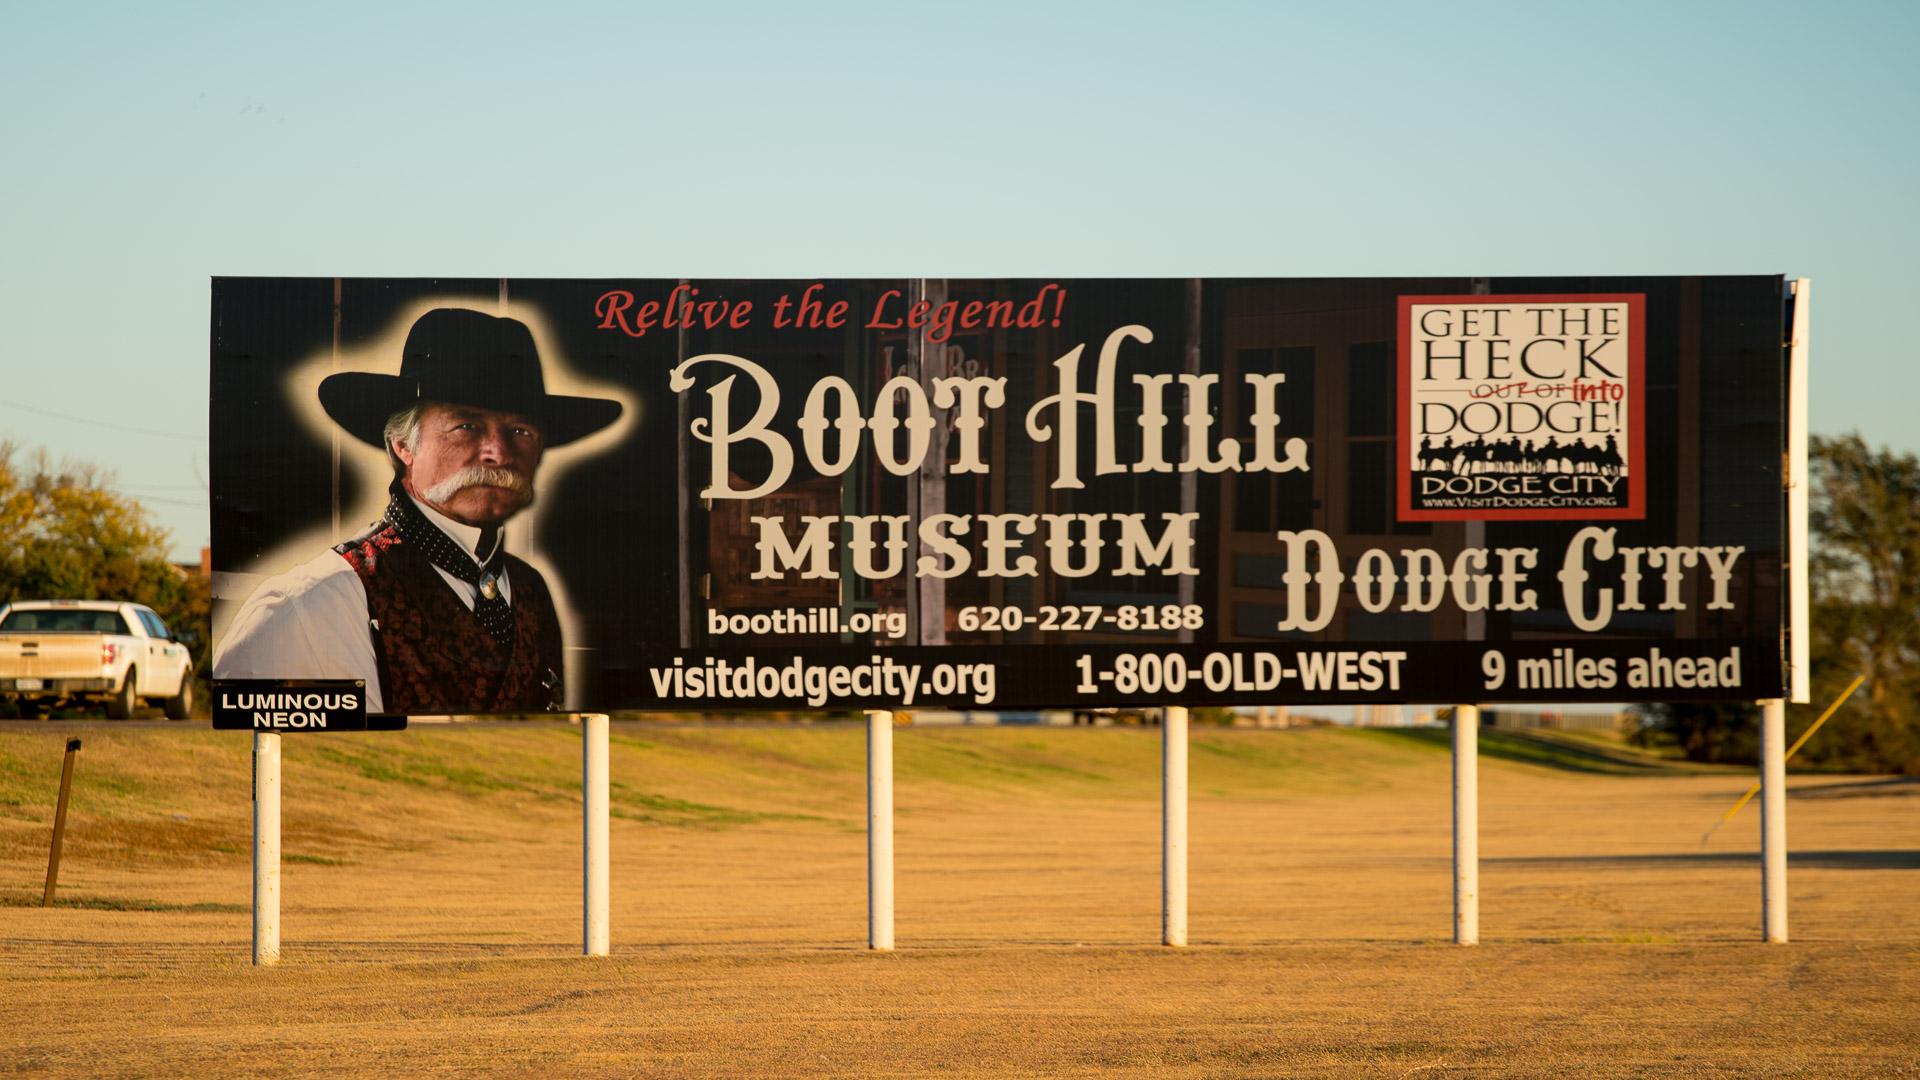 Boot Hill Museum in Dodge City, KS - Luminous Neon Art & Sign Systems